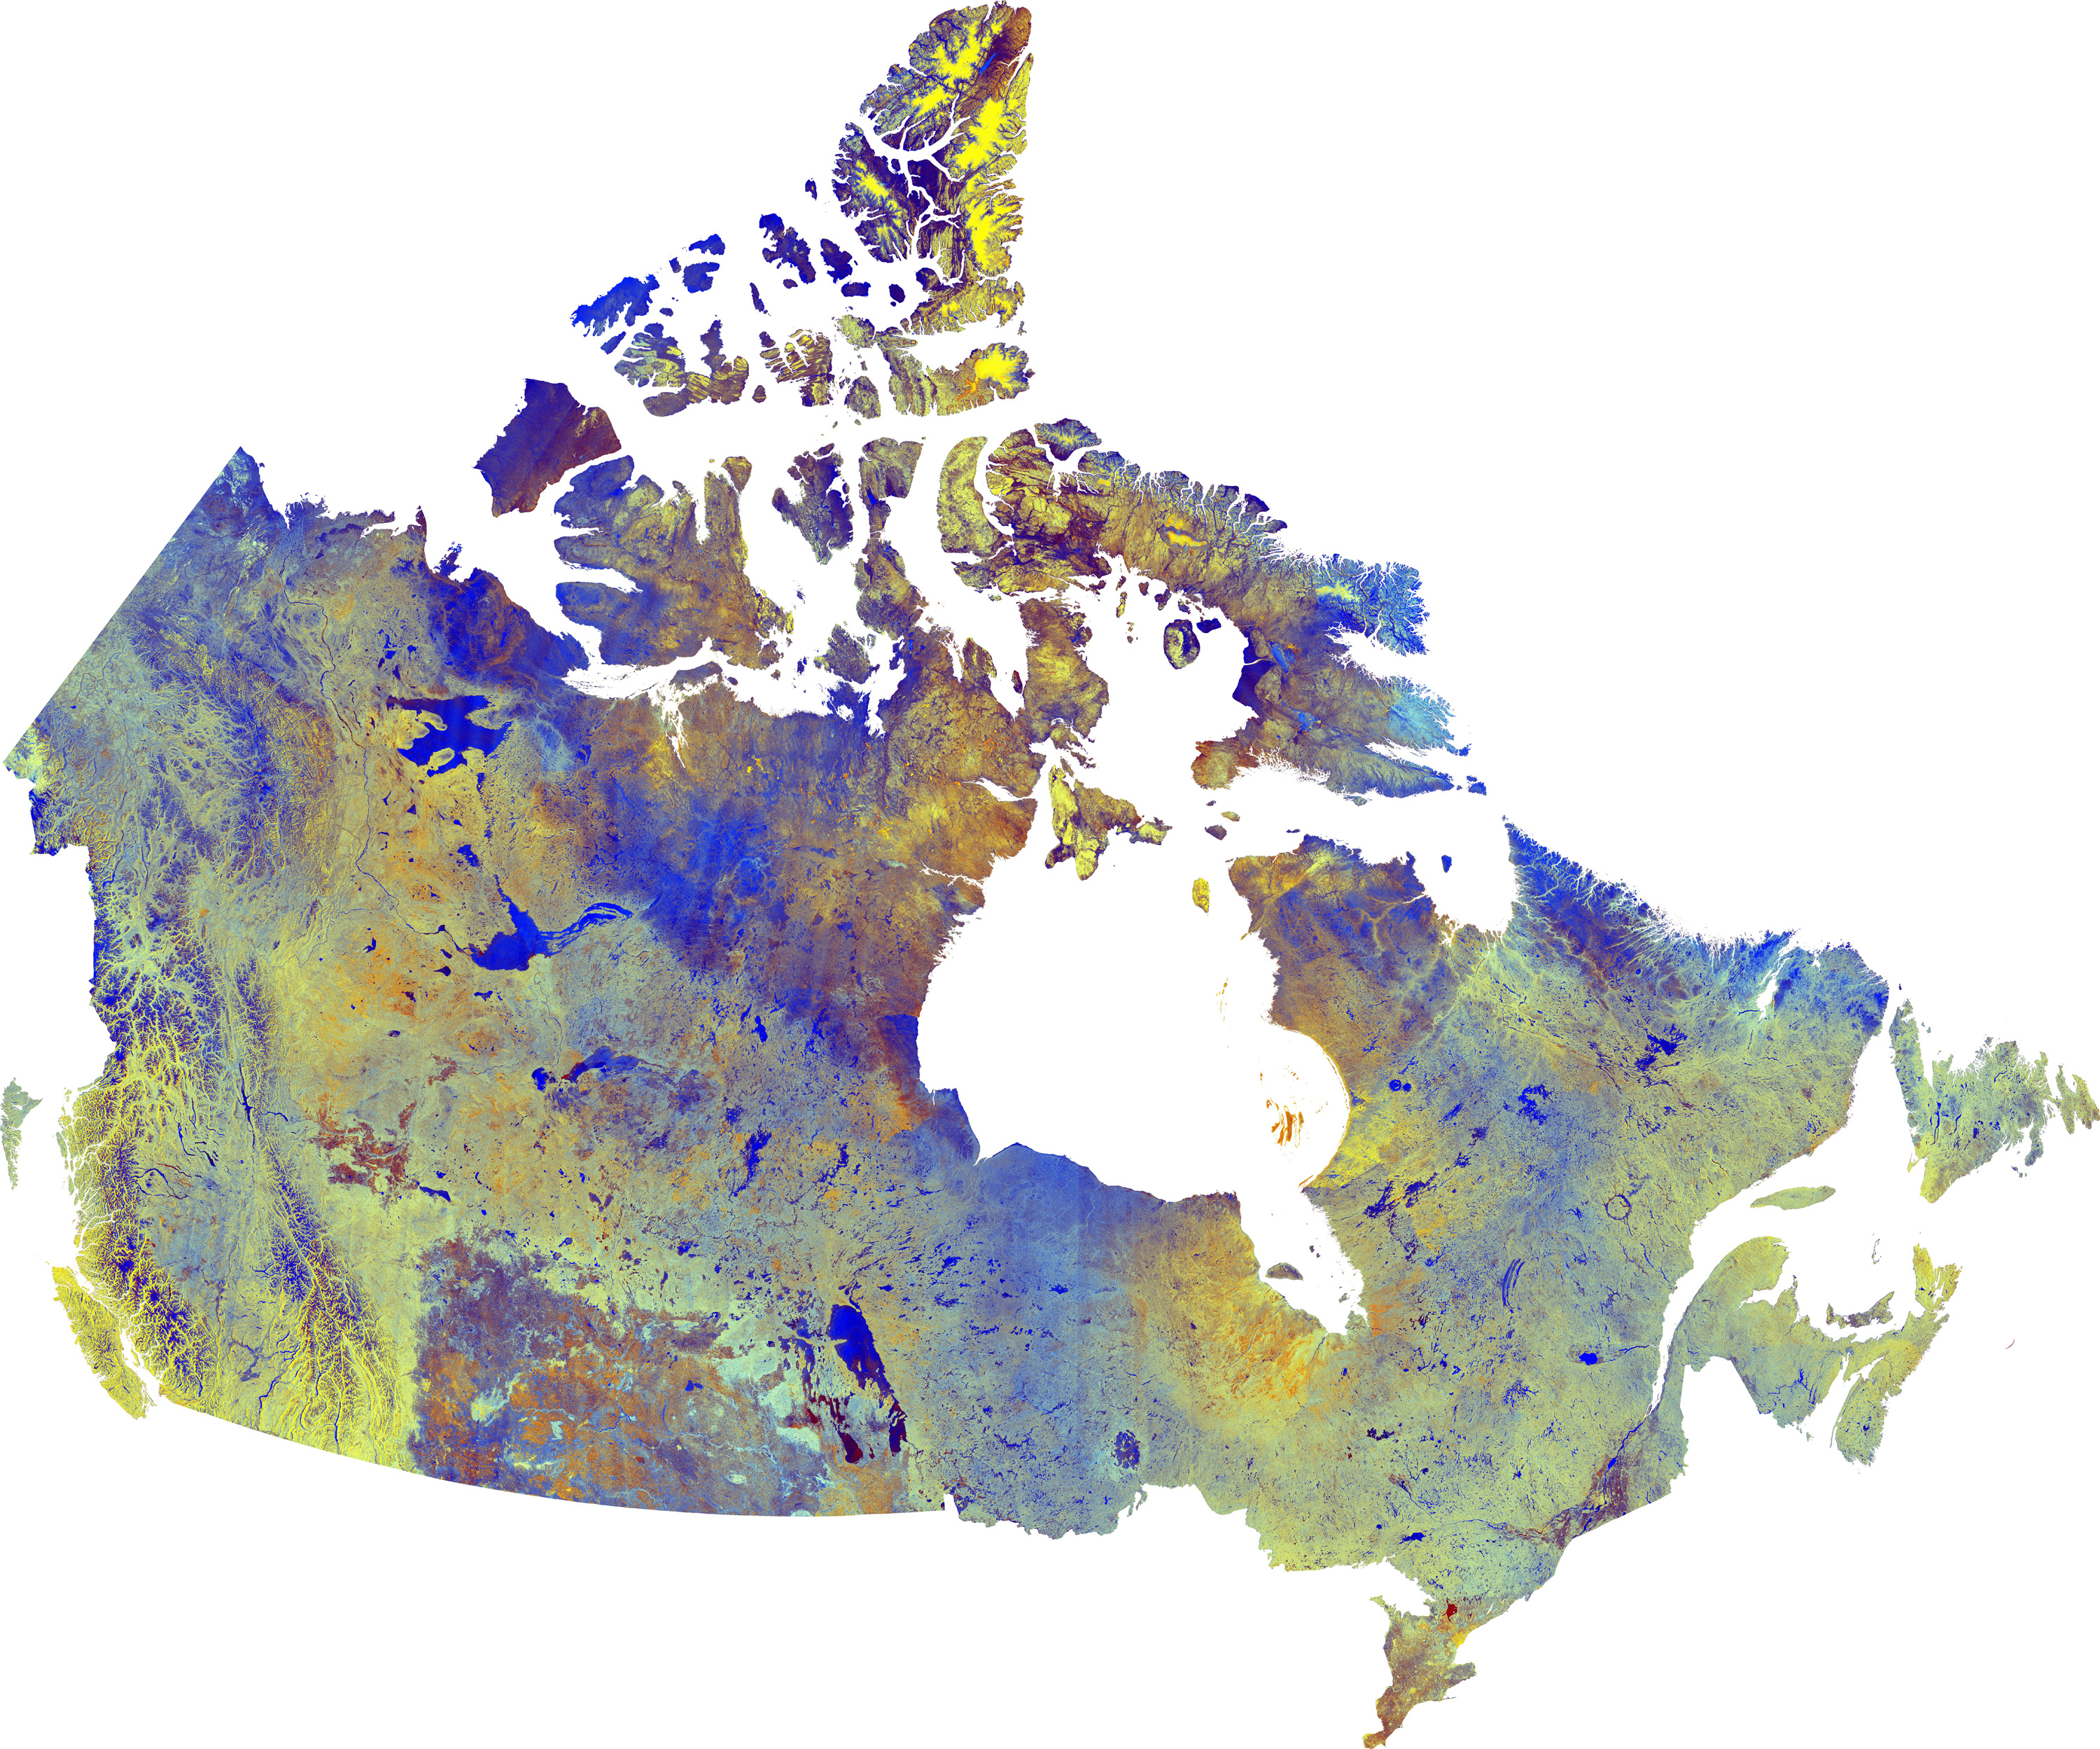 https://wiki.gccollab.ca/File:Canada_from_space.png